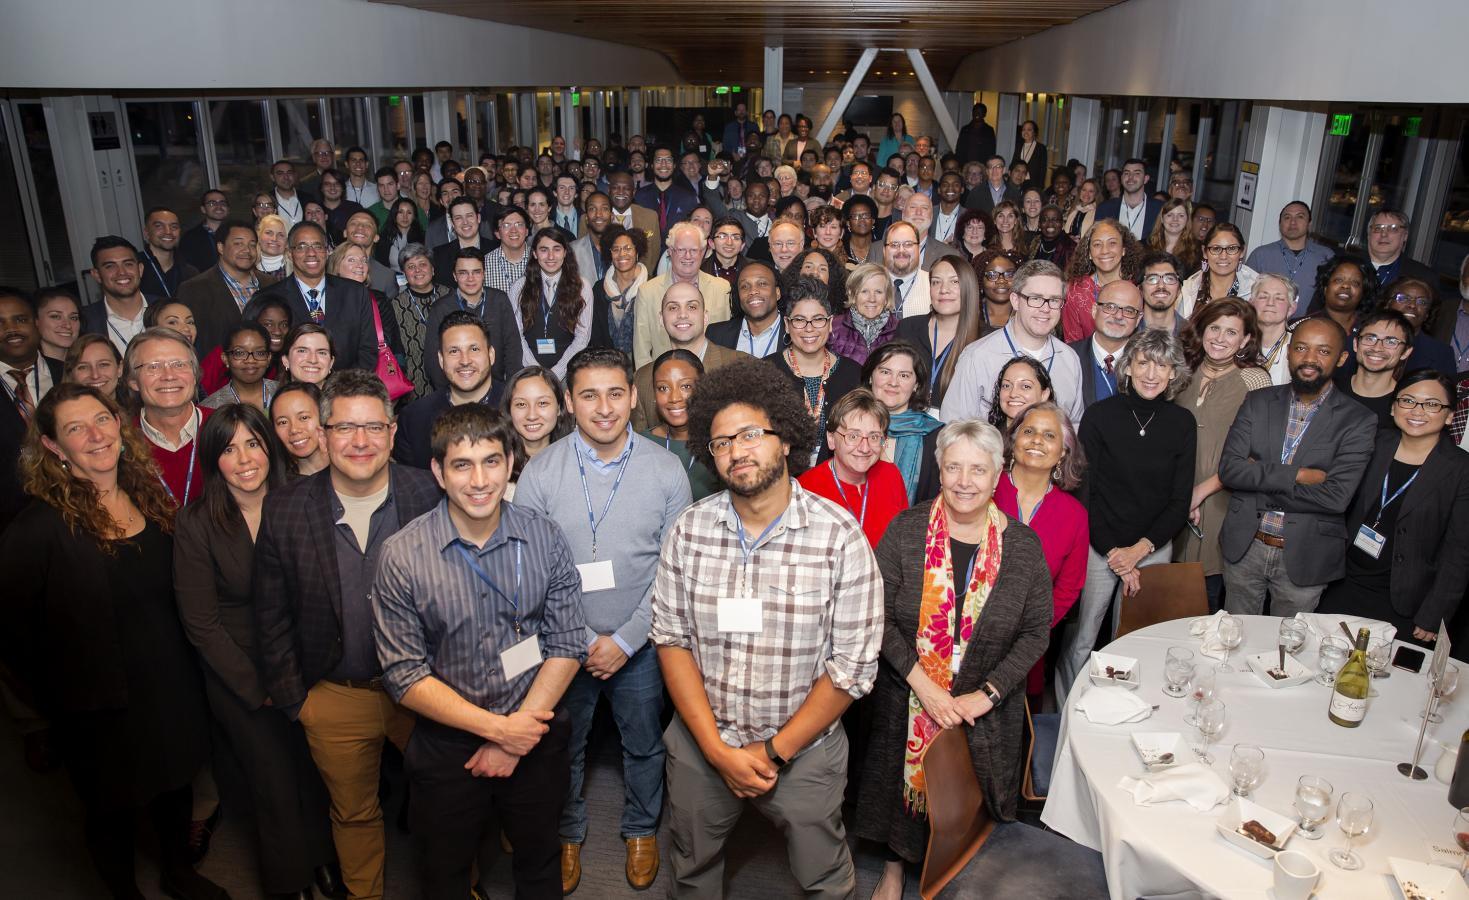 Attendees of the 2018 UC Berkeley led Research Alliance conference